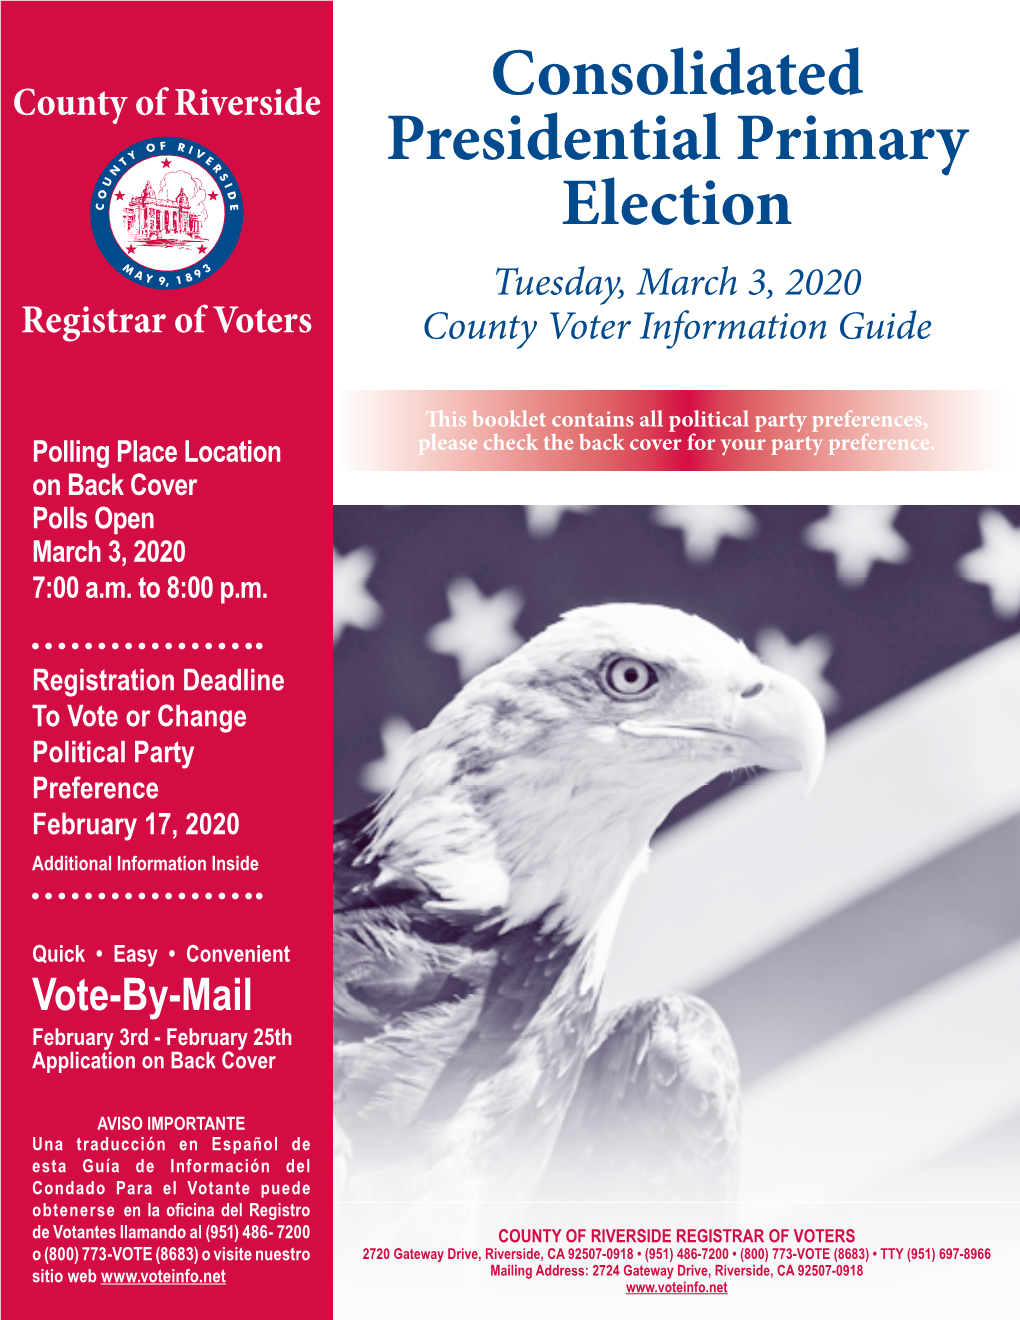 Sample Ballot and Take It with You to the Polls for Easy Reference